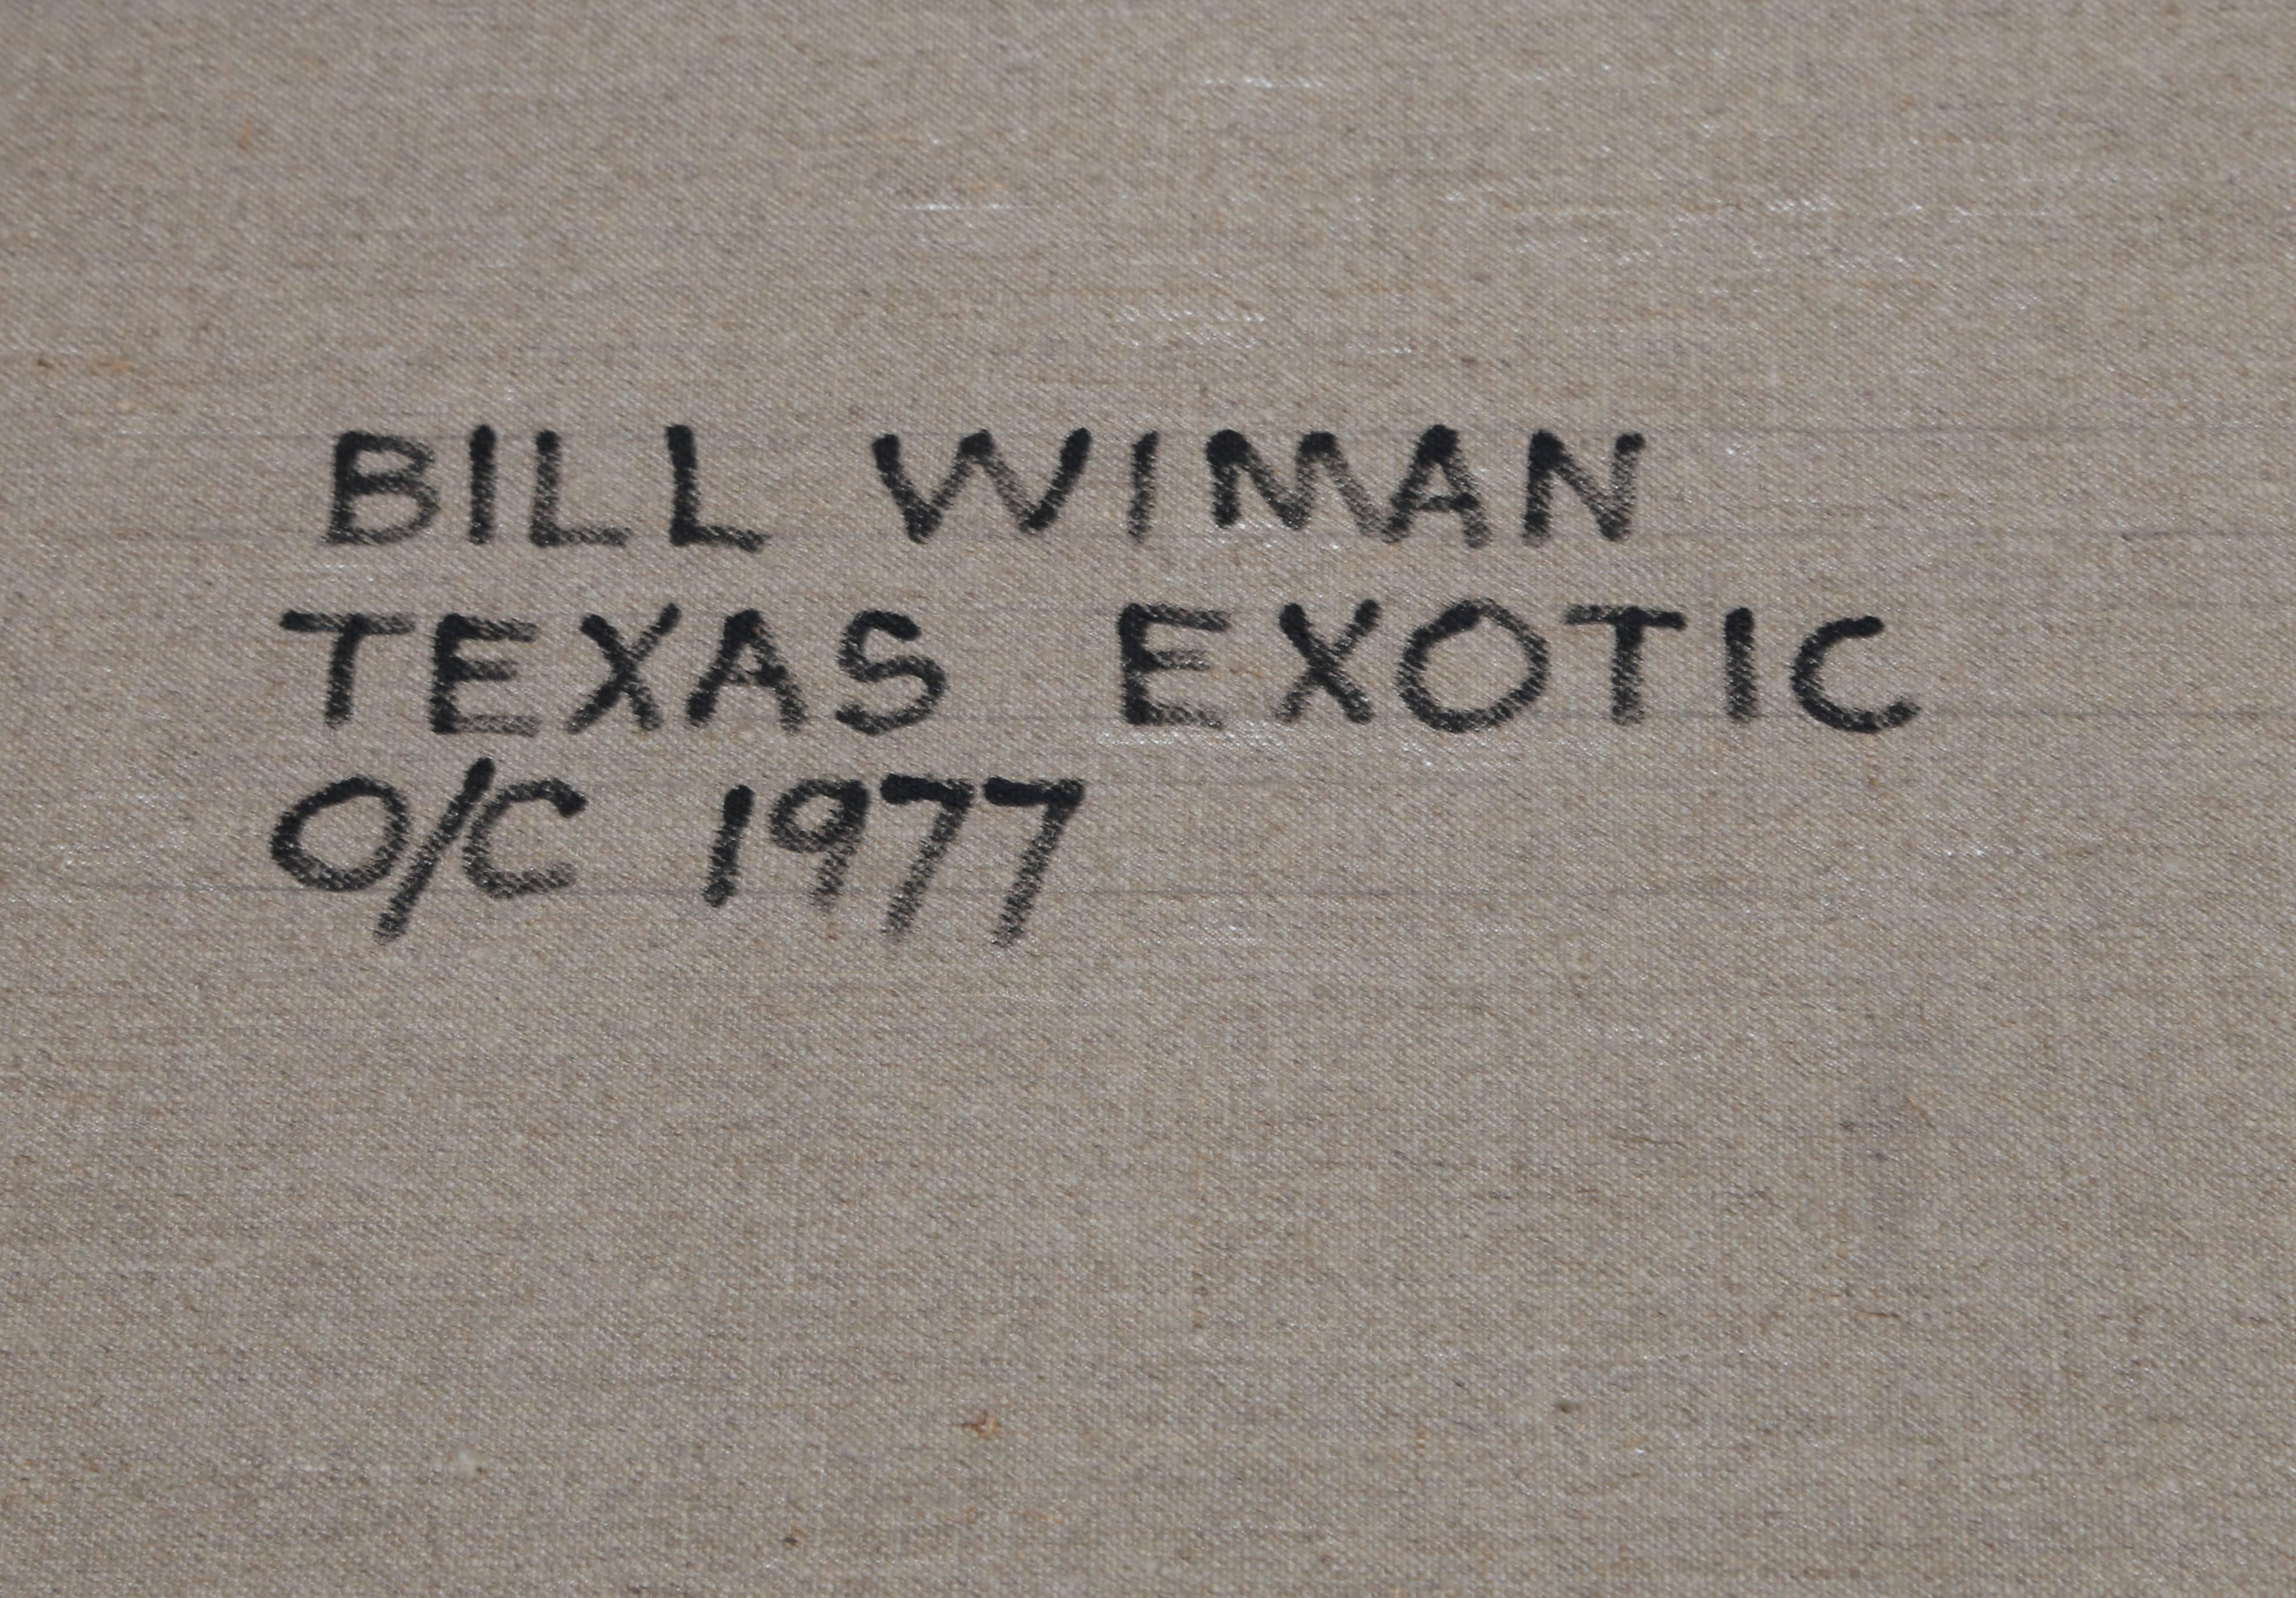 Artist: Bill Wiman
Title: Texas Exotic
Year: 1977 
Medium: Oil on Canvas, signed
Size: 56  x 59.5 in. (142.24  x 151.13 cm)
Frame: 57 x 61 inches